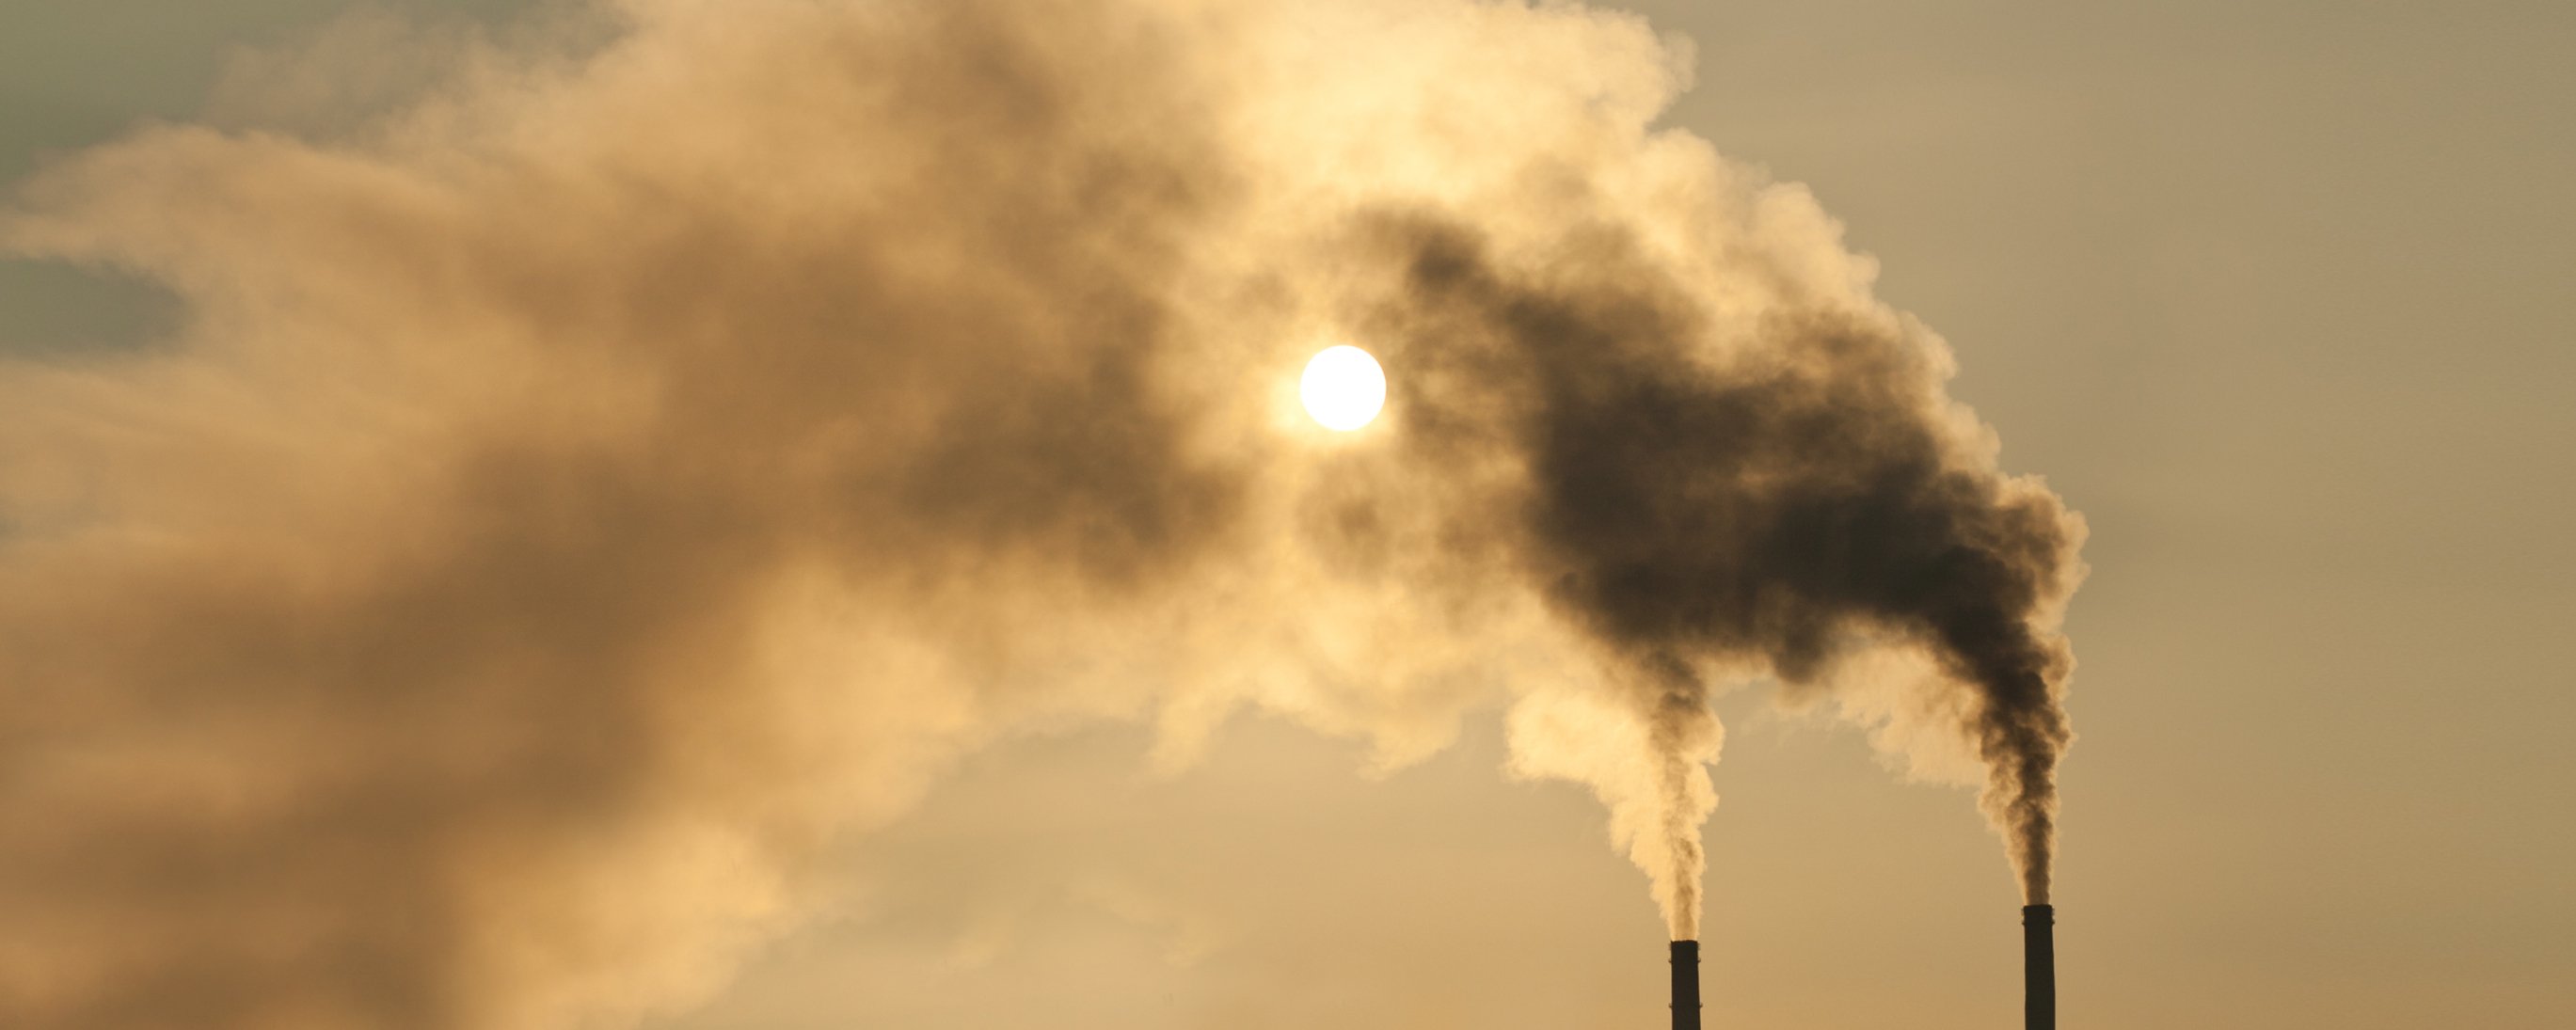 Can Companies' Carbon Emissions Affect Their Stock Performance?  